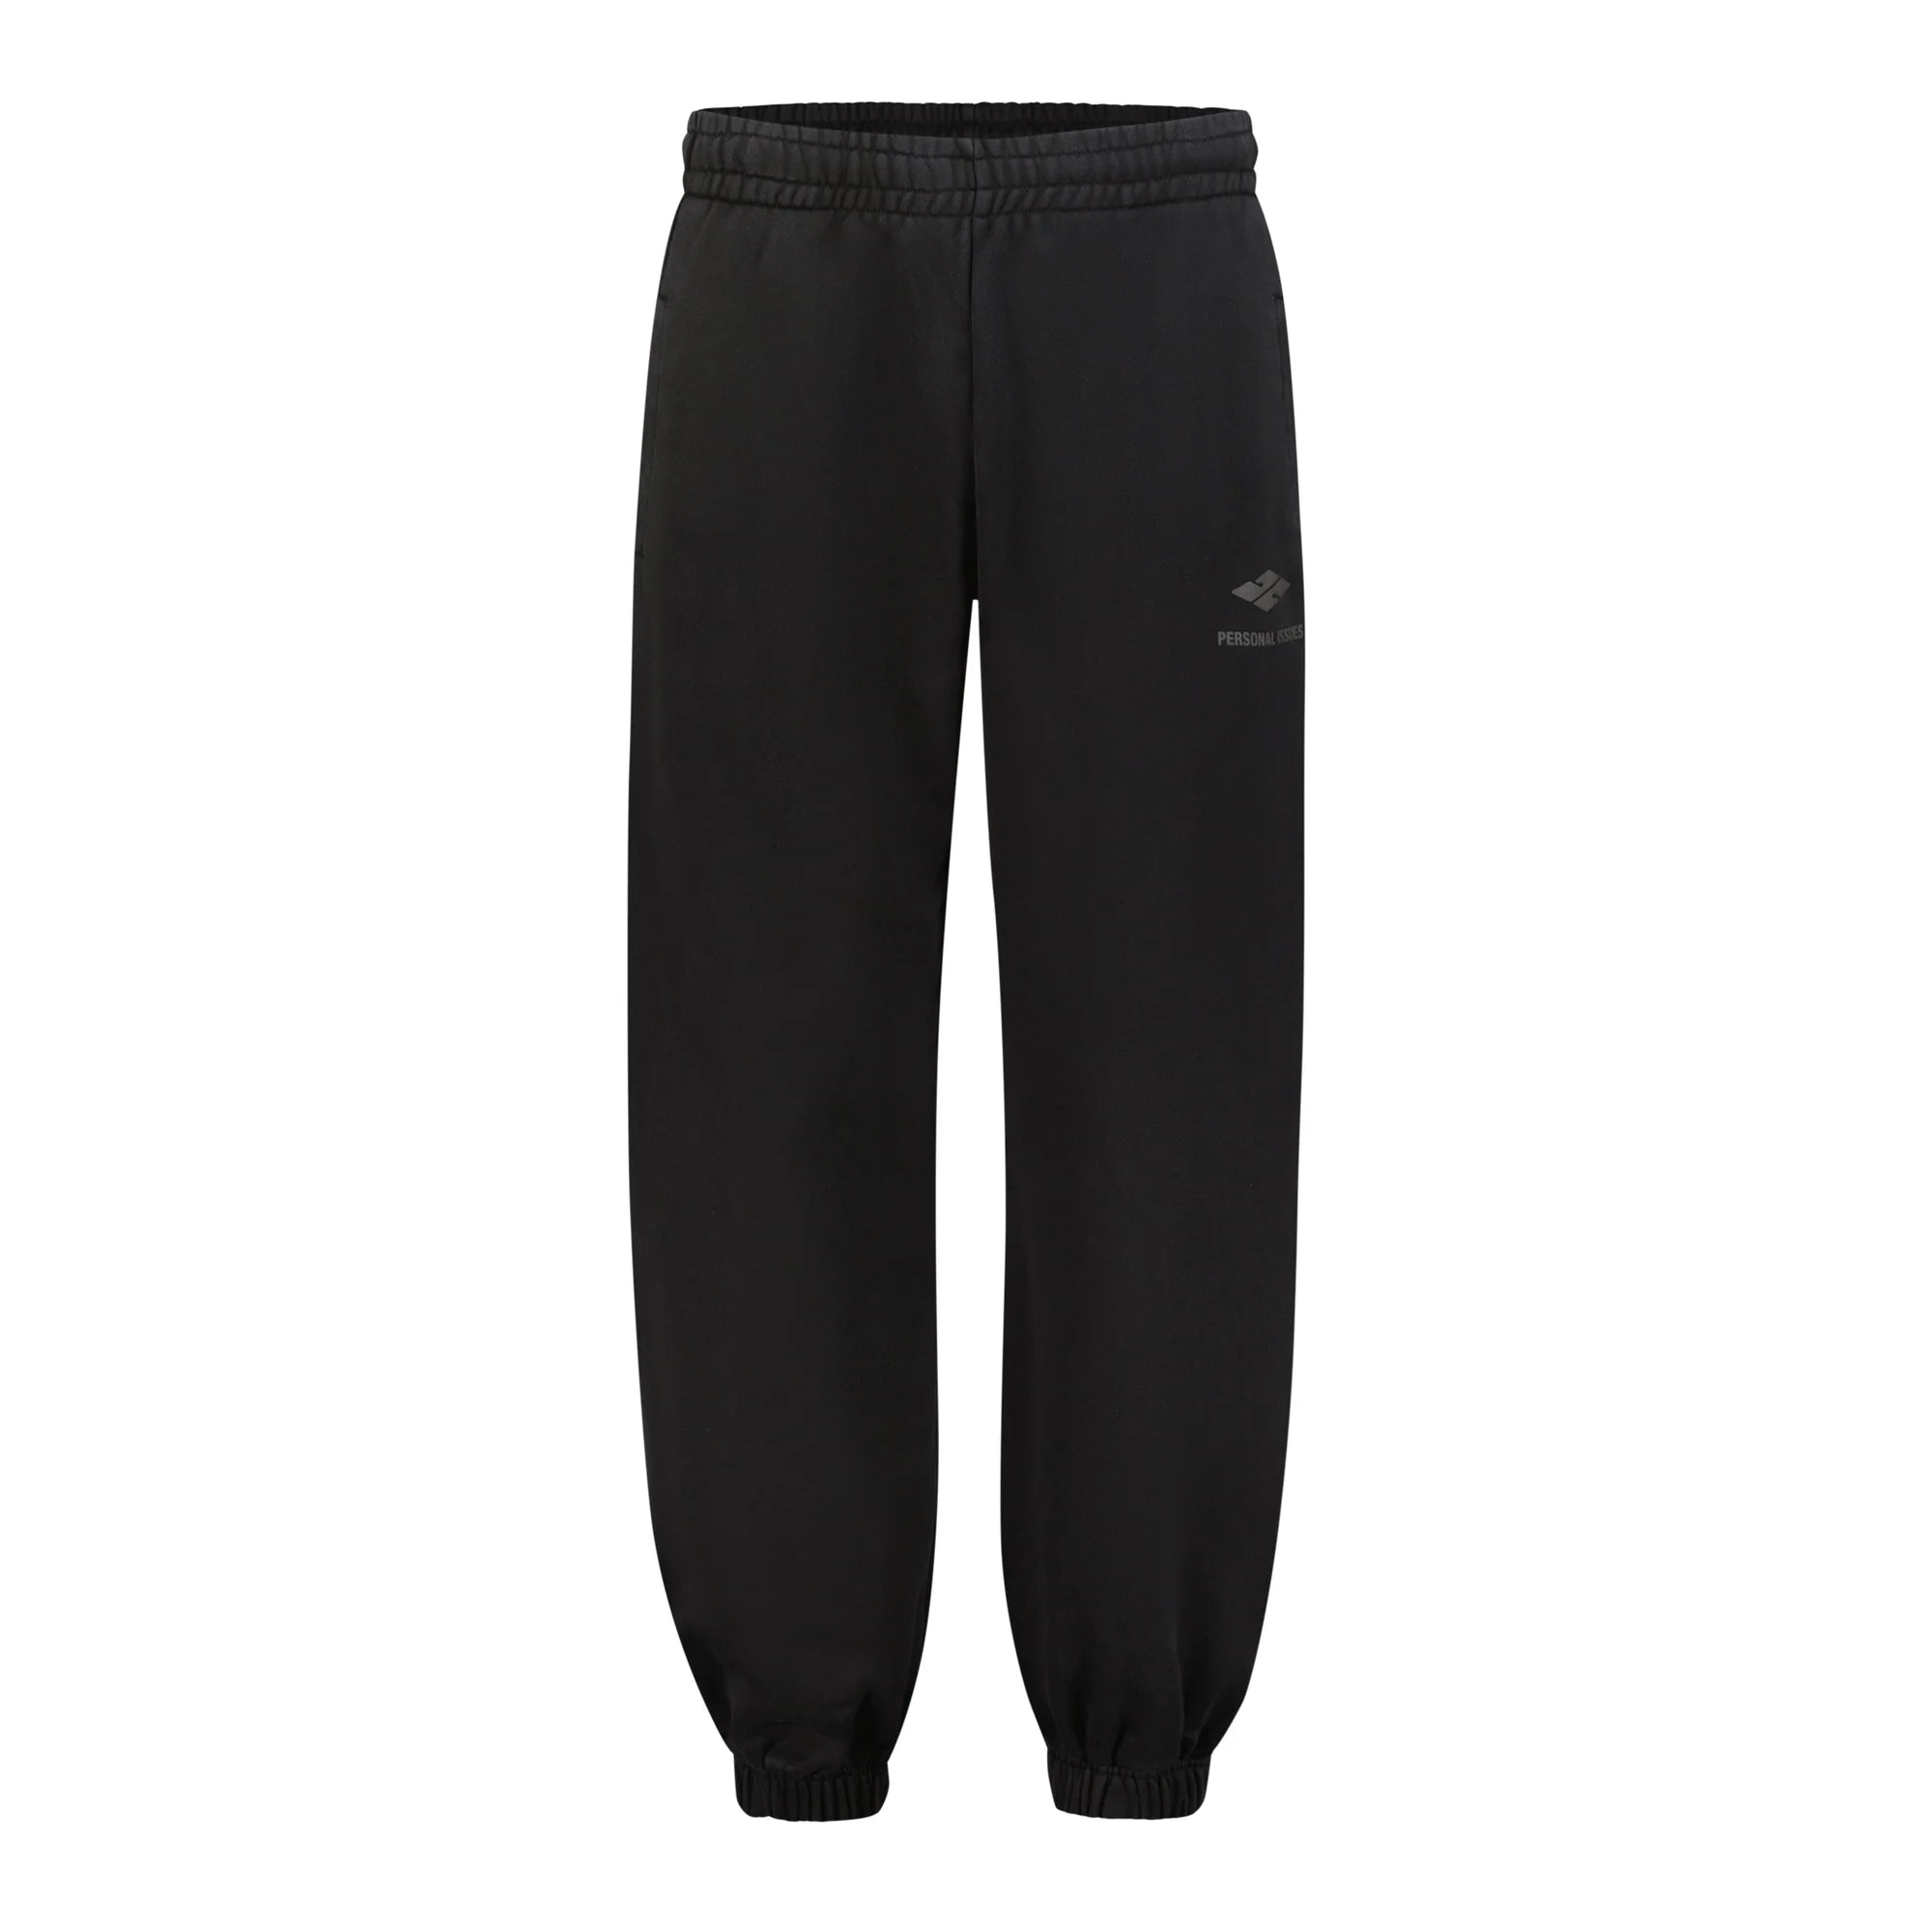 Personal Issues Sweatpants - Black no